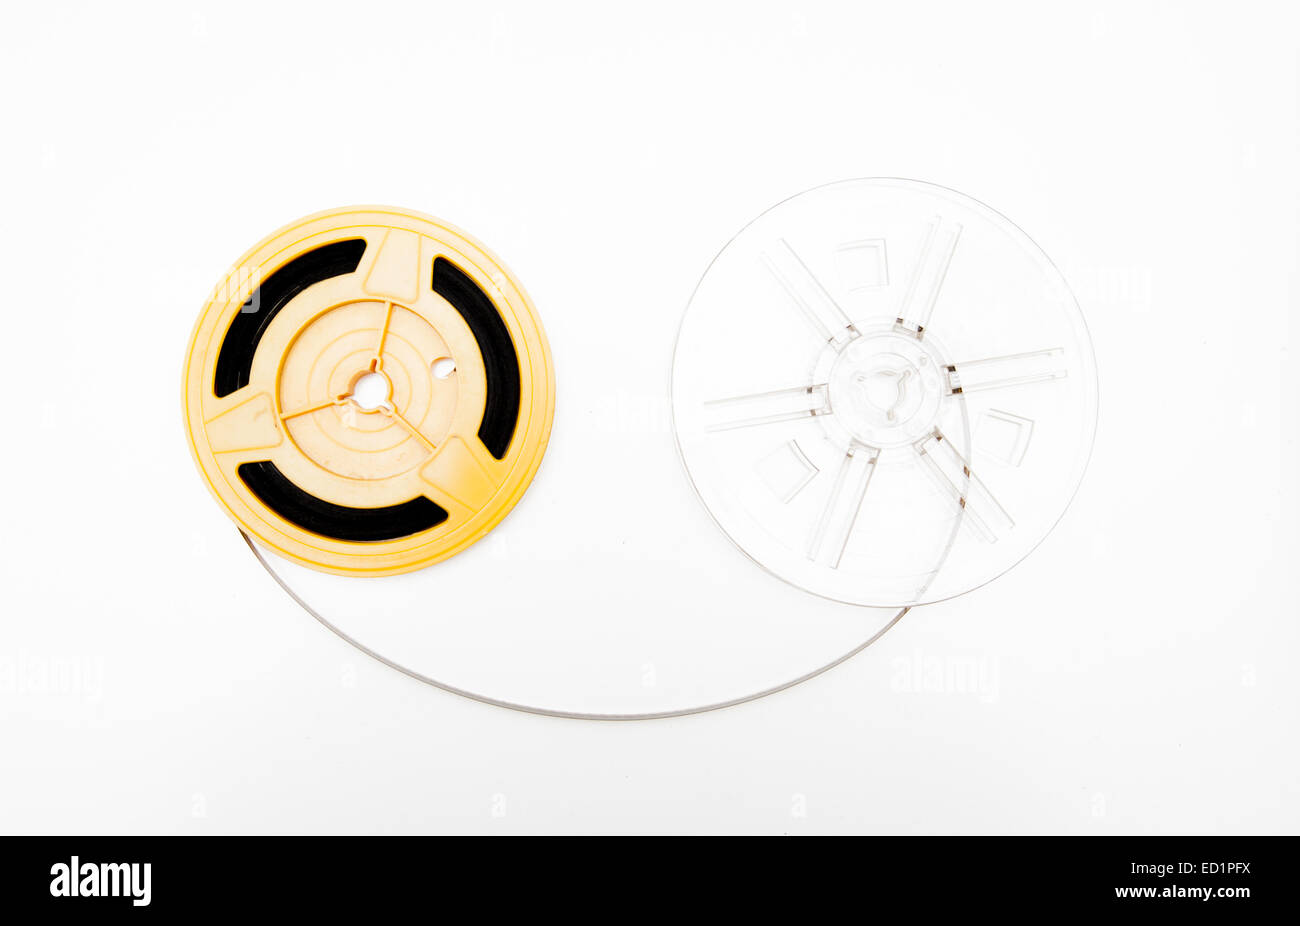 Empty transparent and yellow 8mm movie reels on white background